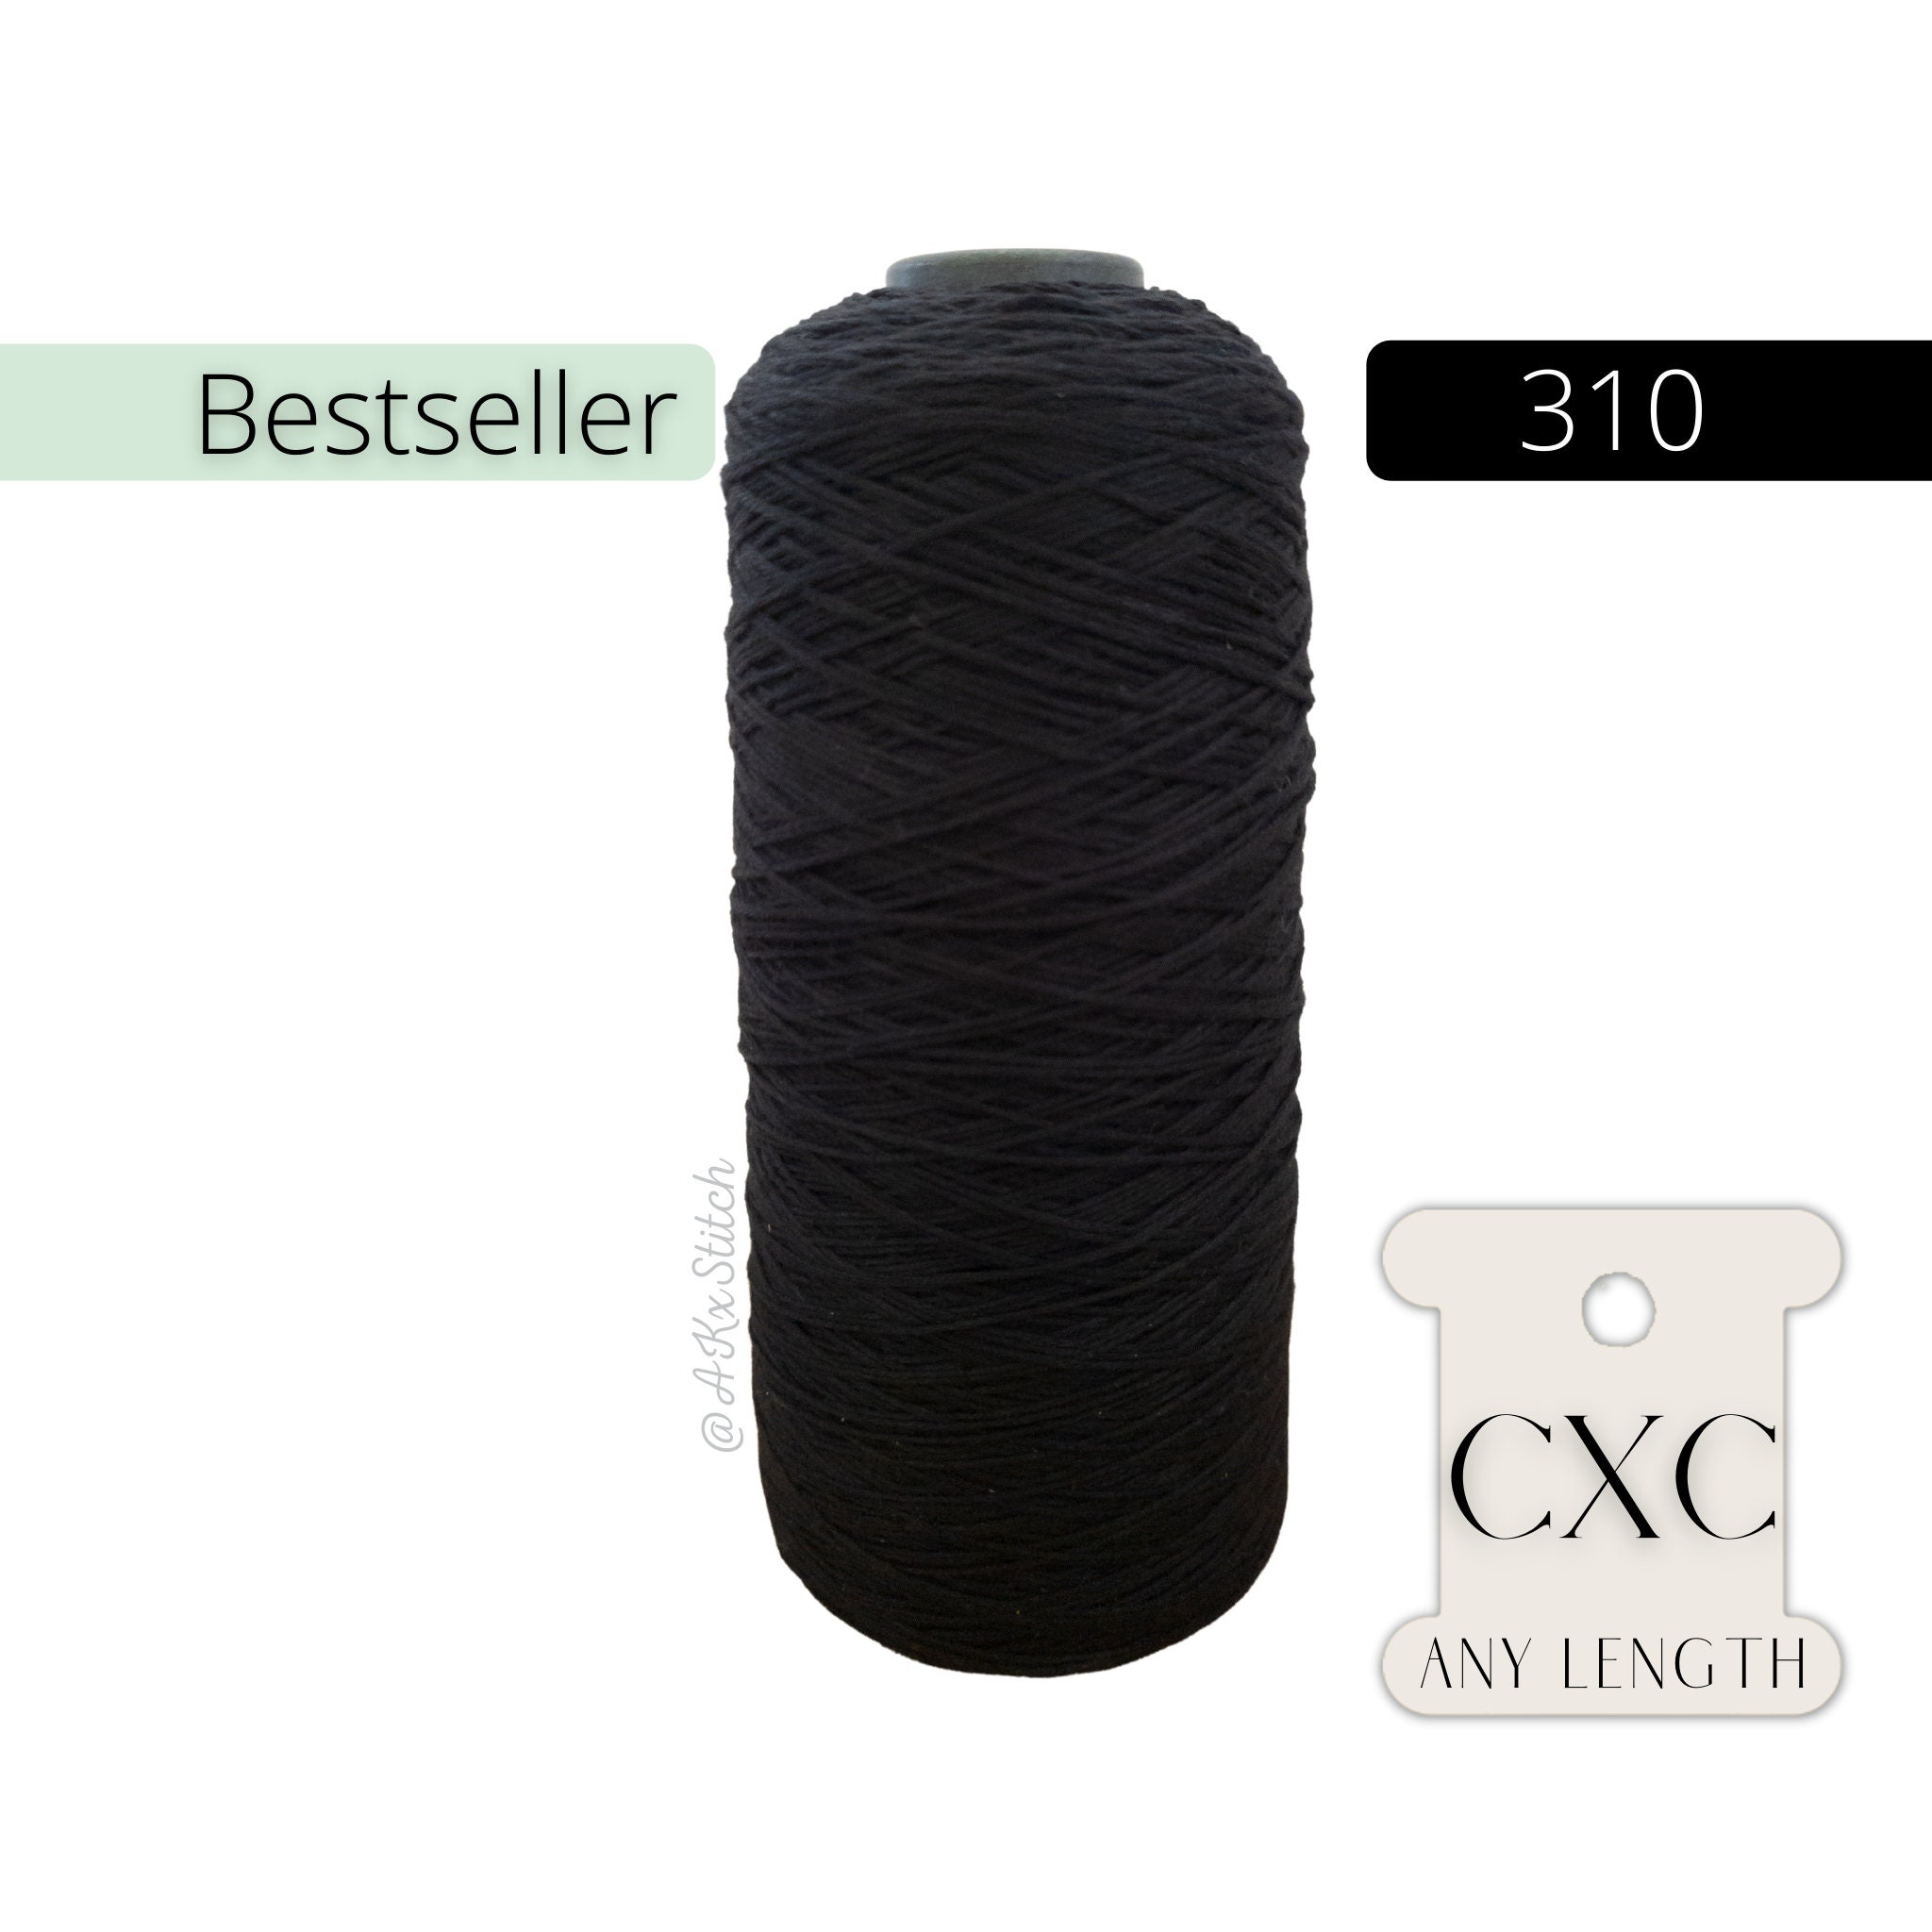 BLACK DMC Stranded Cotton Embroidery Thread 310 - Lot Of 42 Plus Floss